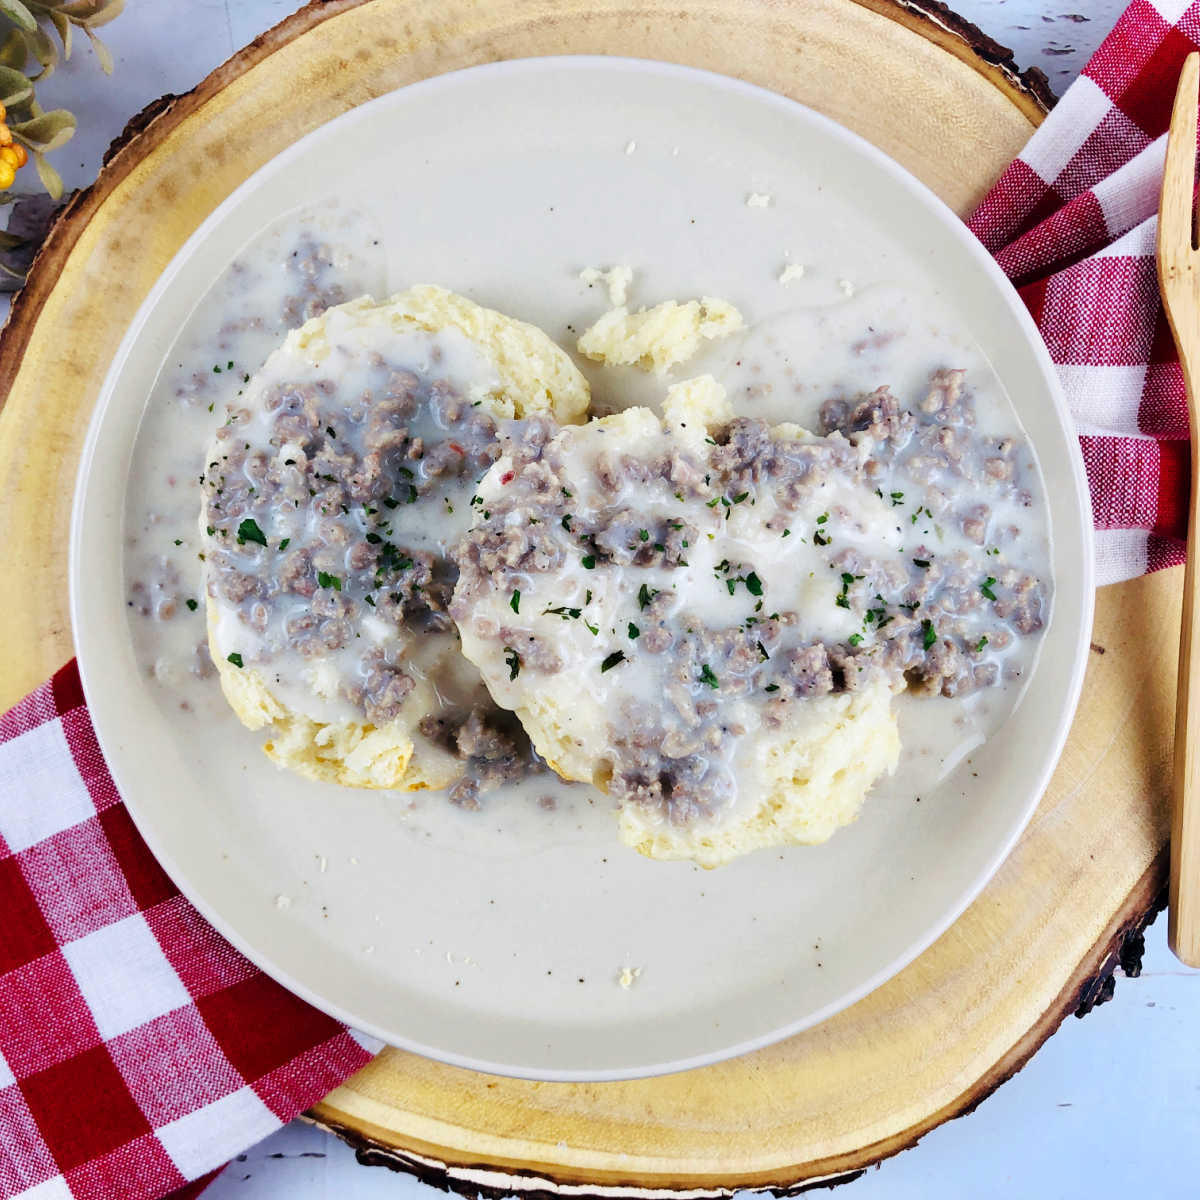 Plate of homemade biscuits topped with creamy sausage sawmill gravy with red checkered napkin.